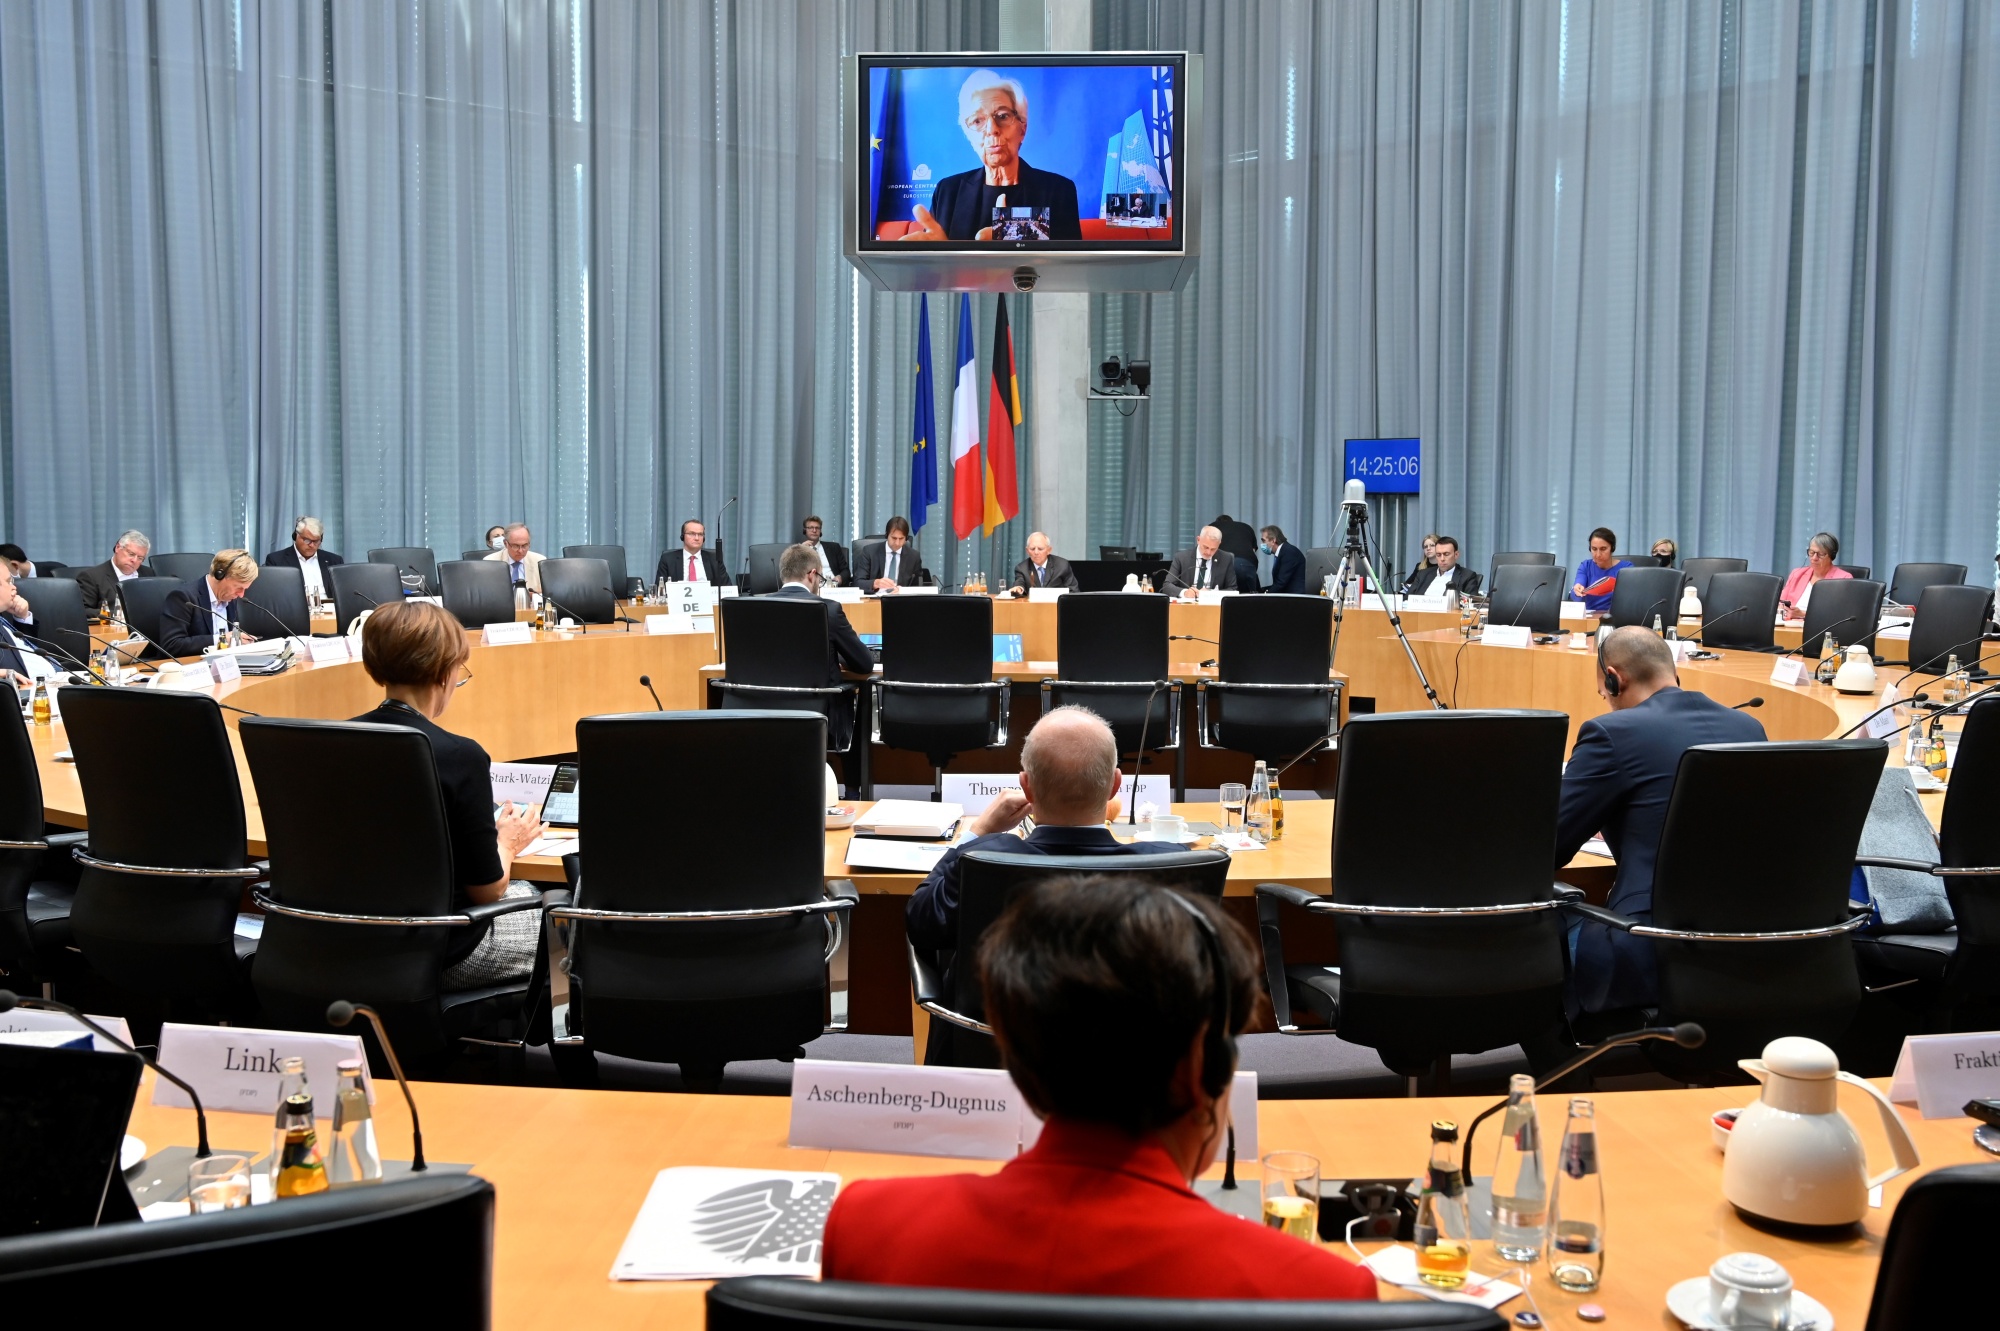 Christine Lagarde speaks during a videoconference meeting at the Parliamentary Assembly in Berlin, on Sept. 21.